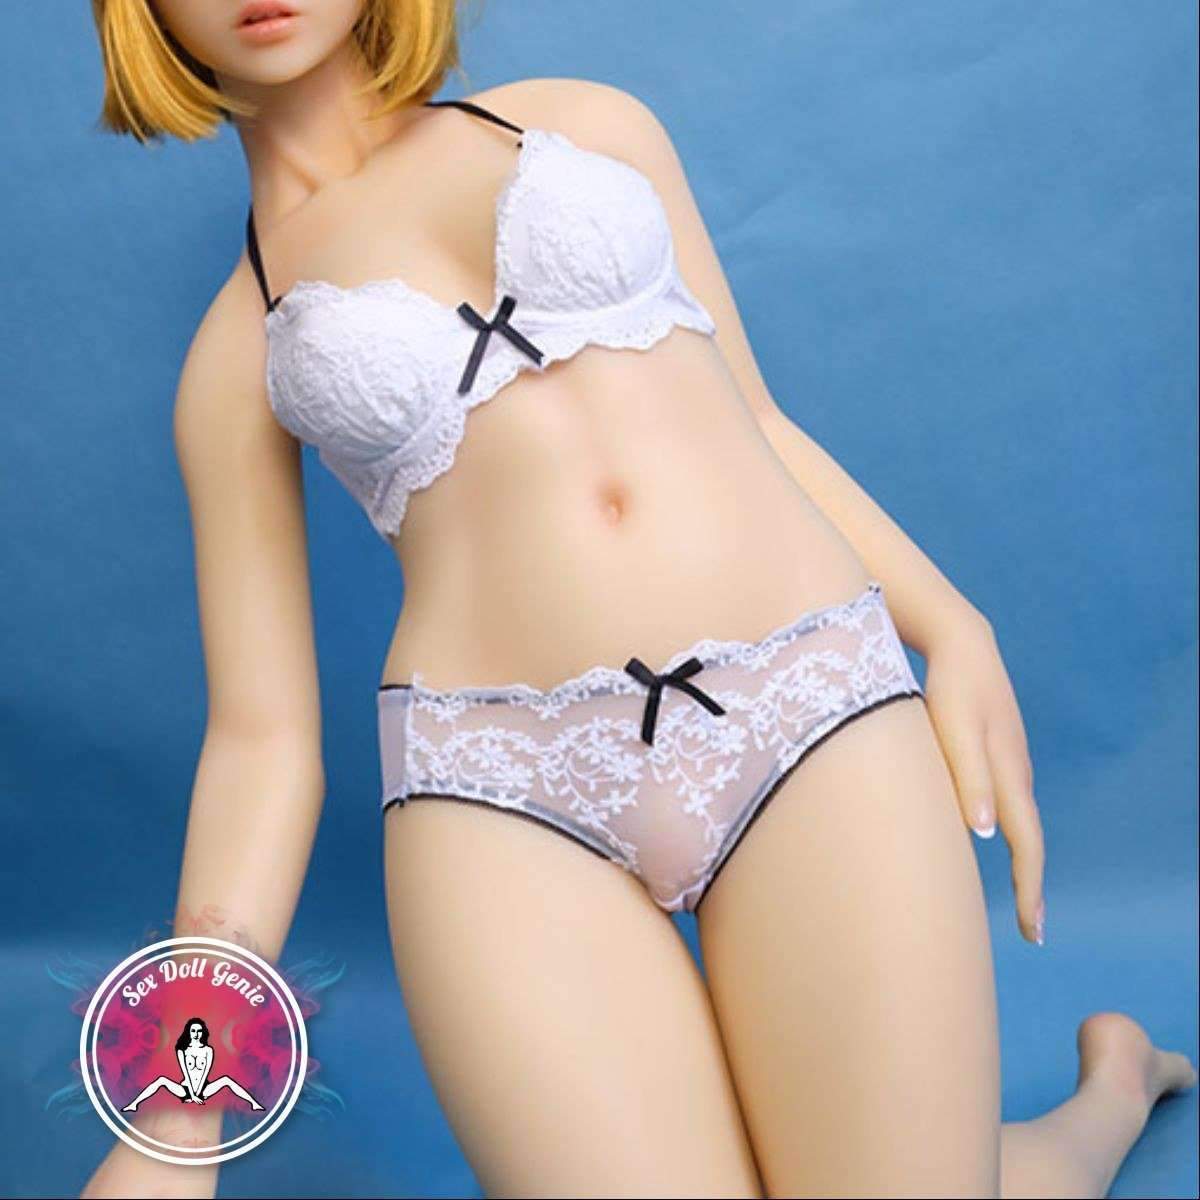 DS Doll - 158cm - Samantha (Elf) Head - Type 2 D Cup Silicone Doll-27